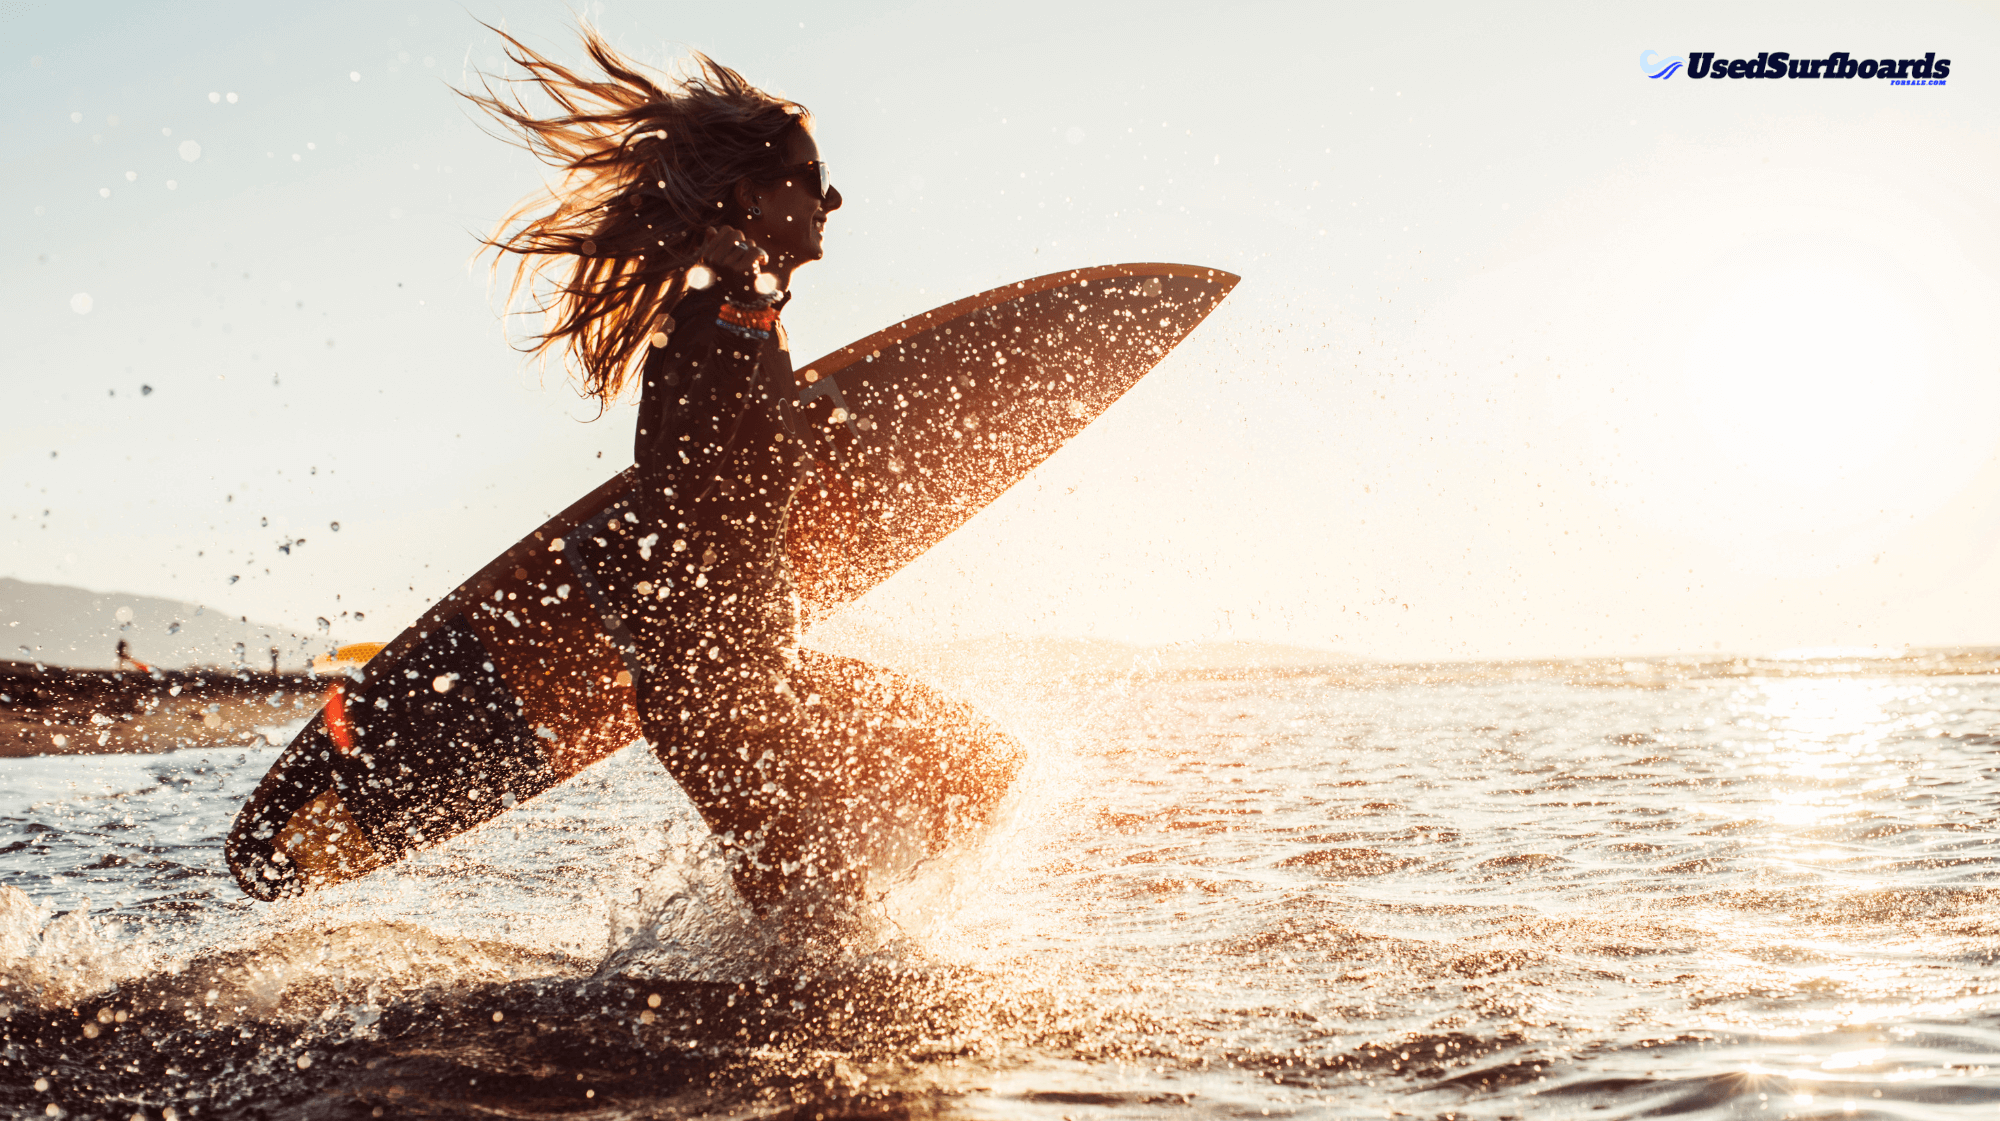 Surfboard Fish: Ride the Waves with Style and Ease